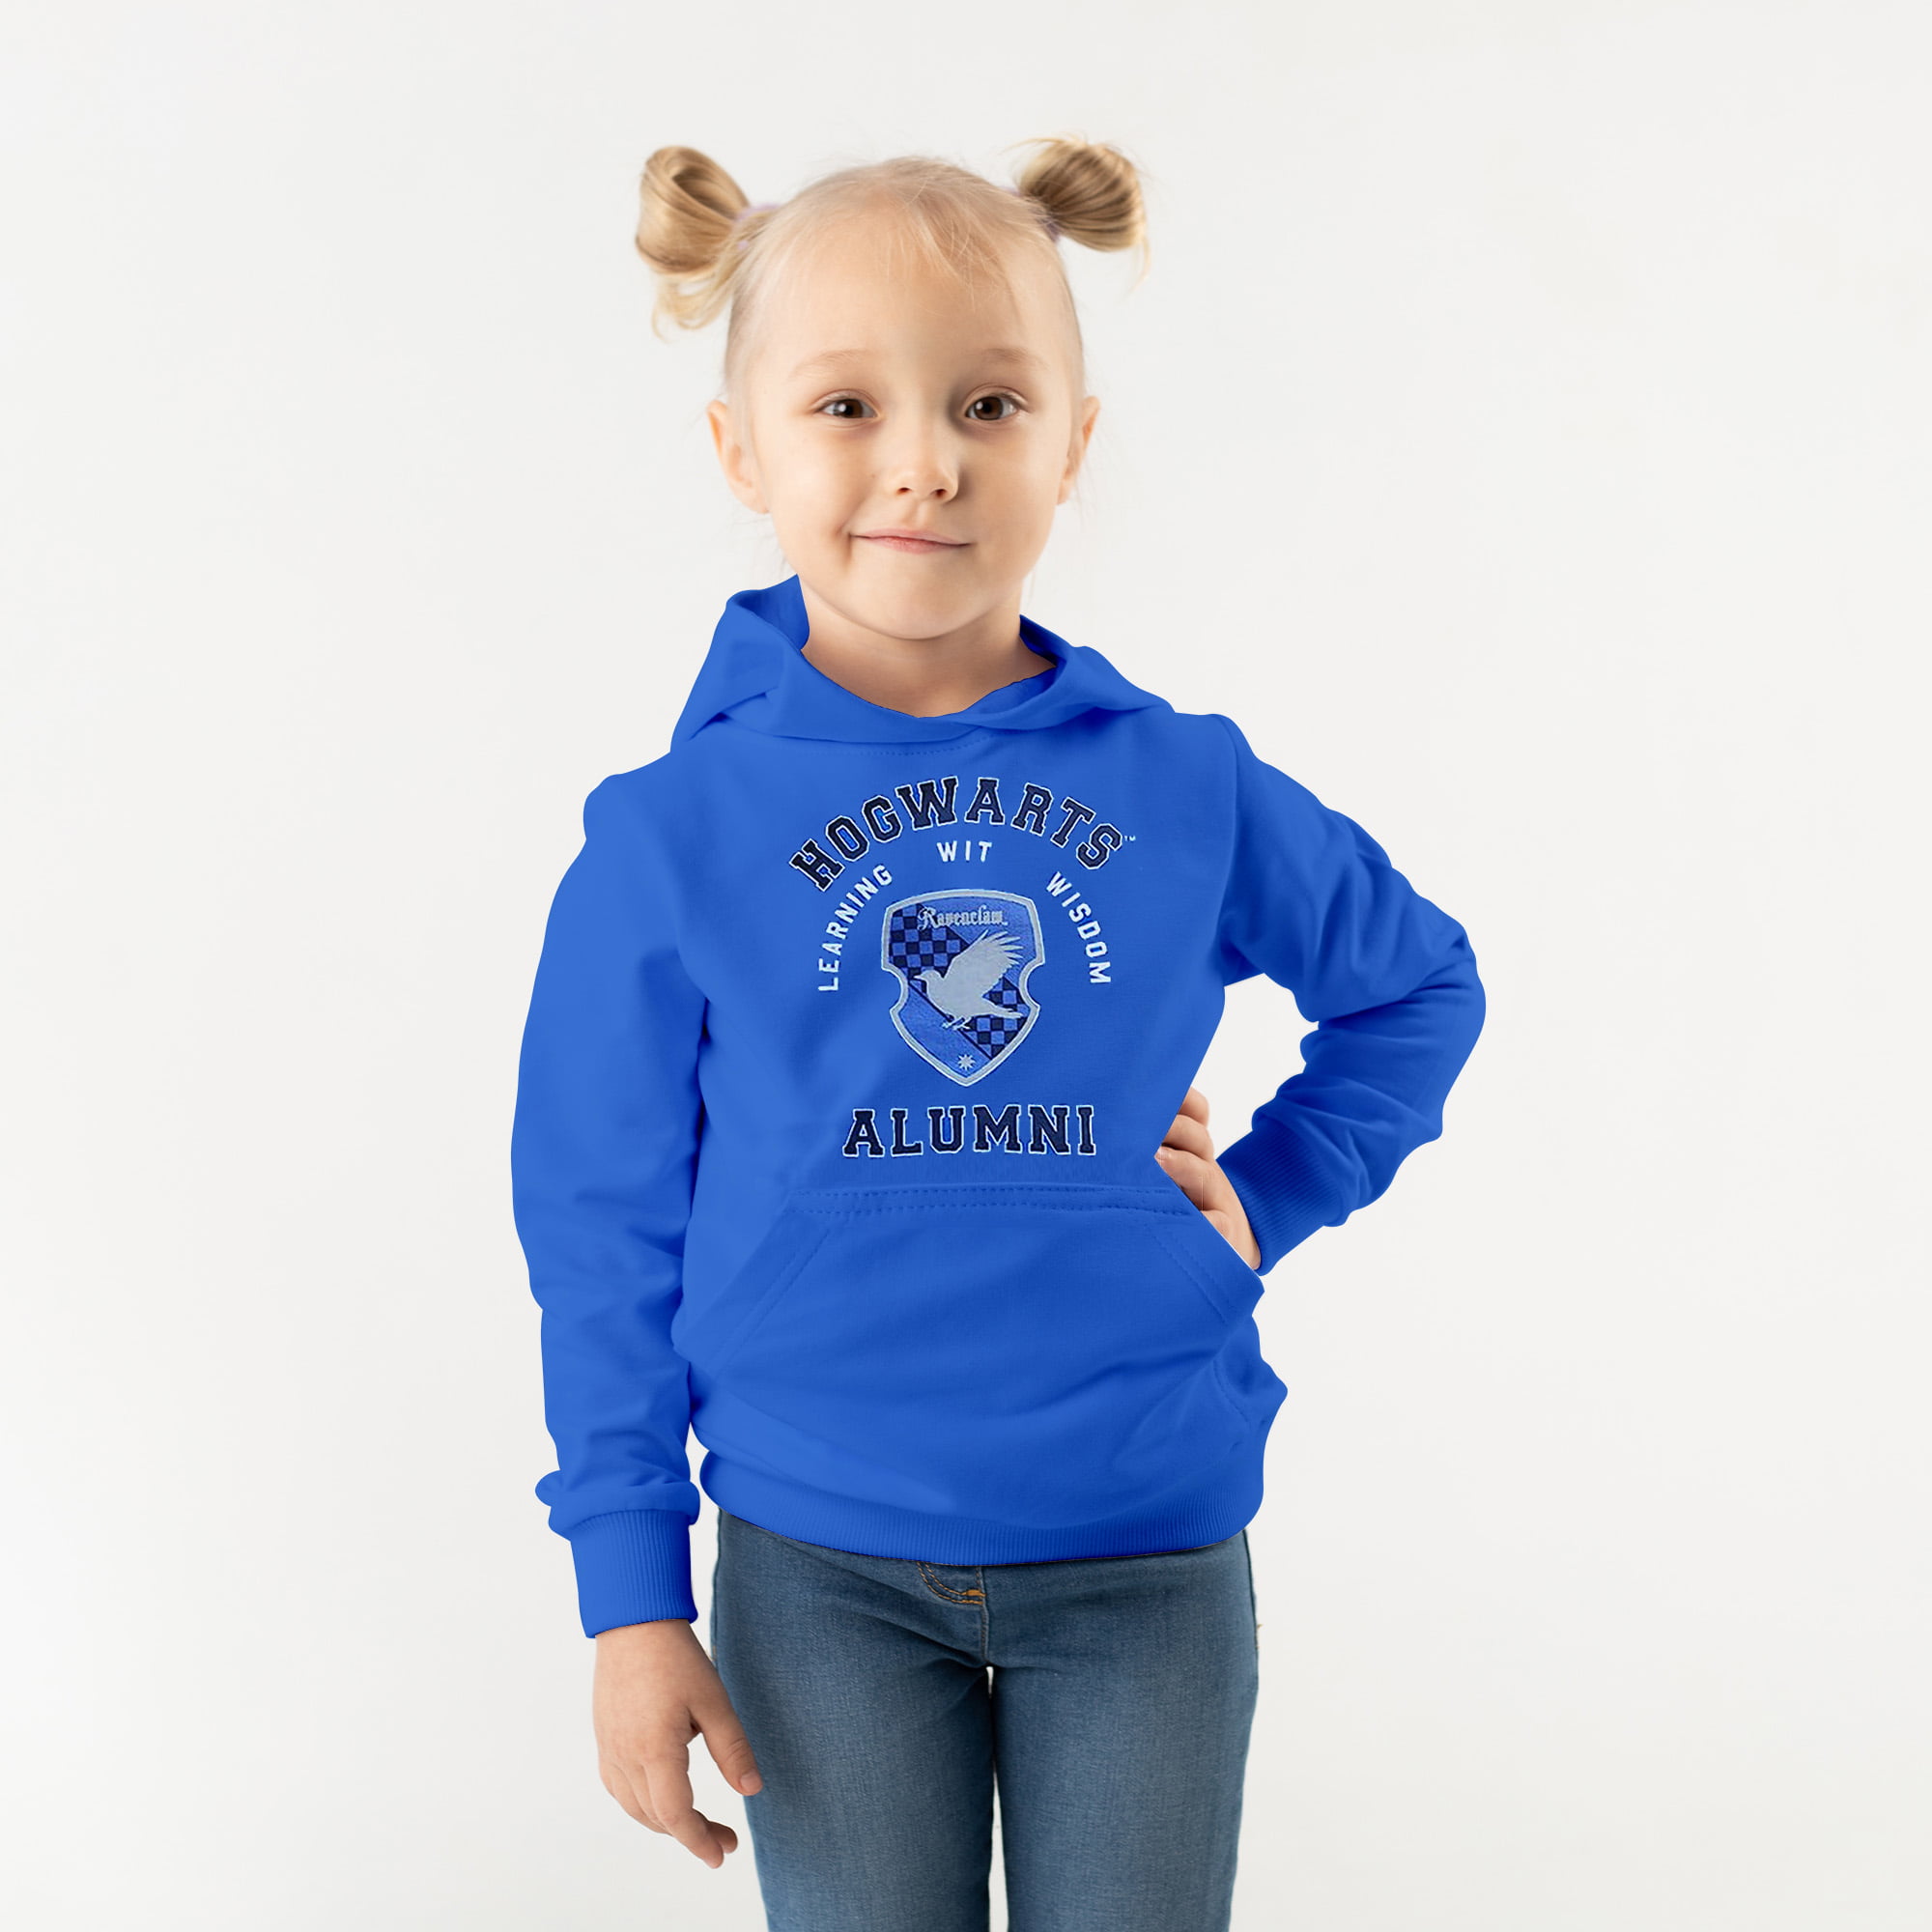 House Potter Crest Hoodie Ravenclaw Harry